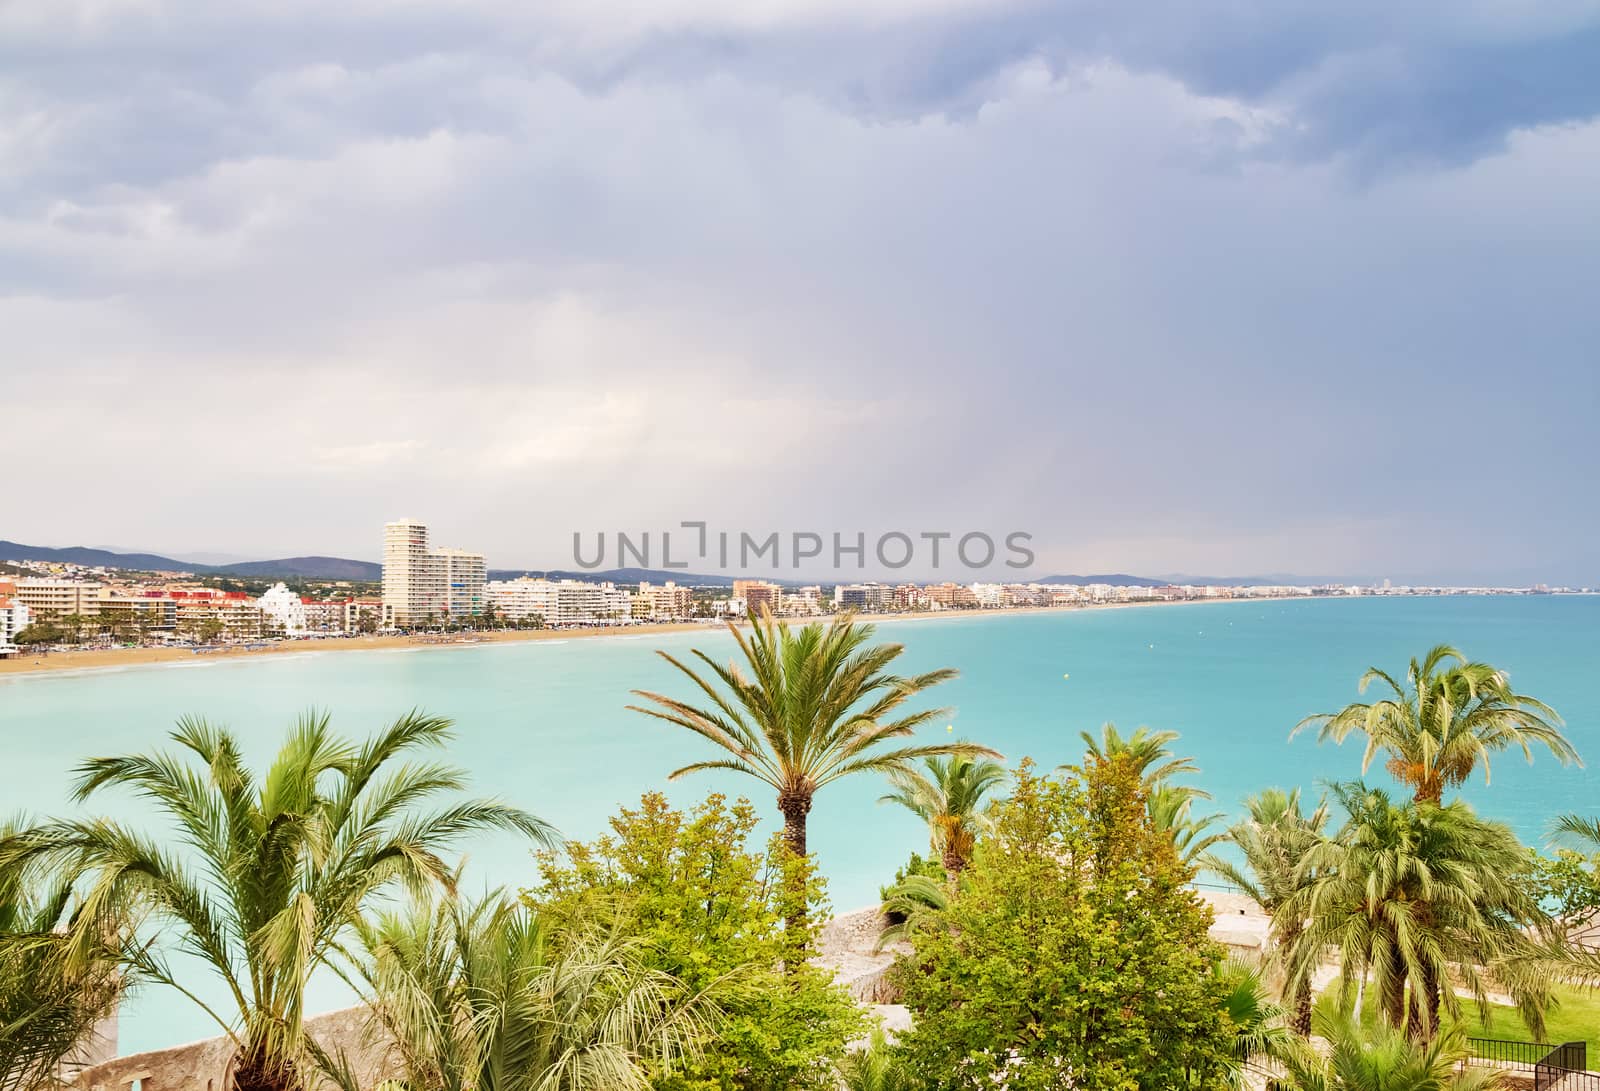 View over the palm trees and coastline of Peniscola, Spain by anikasalsera